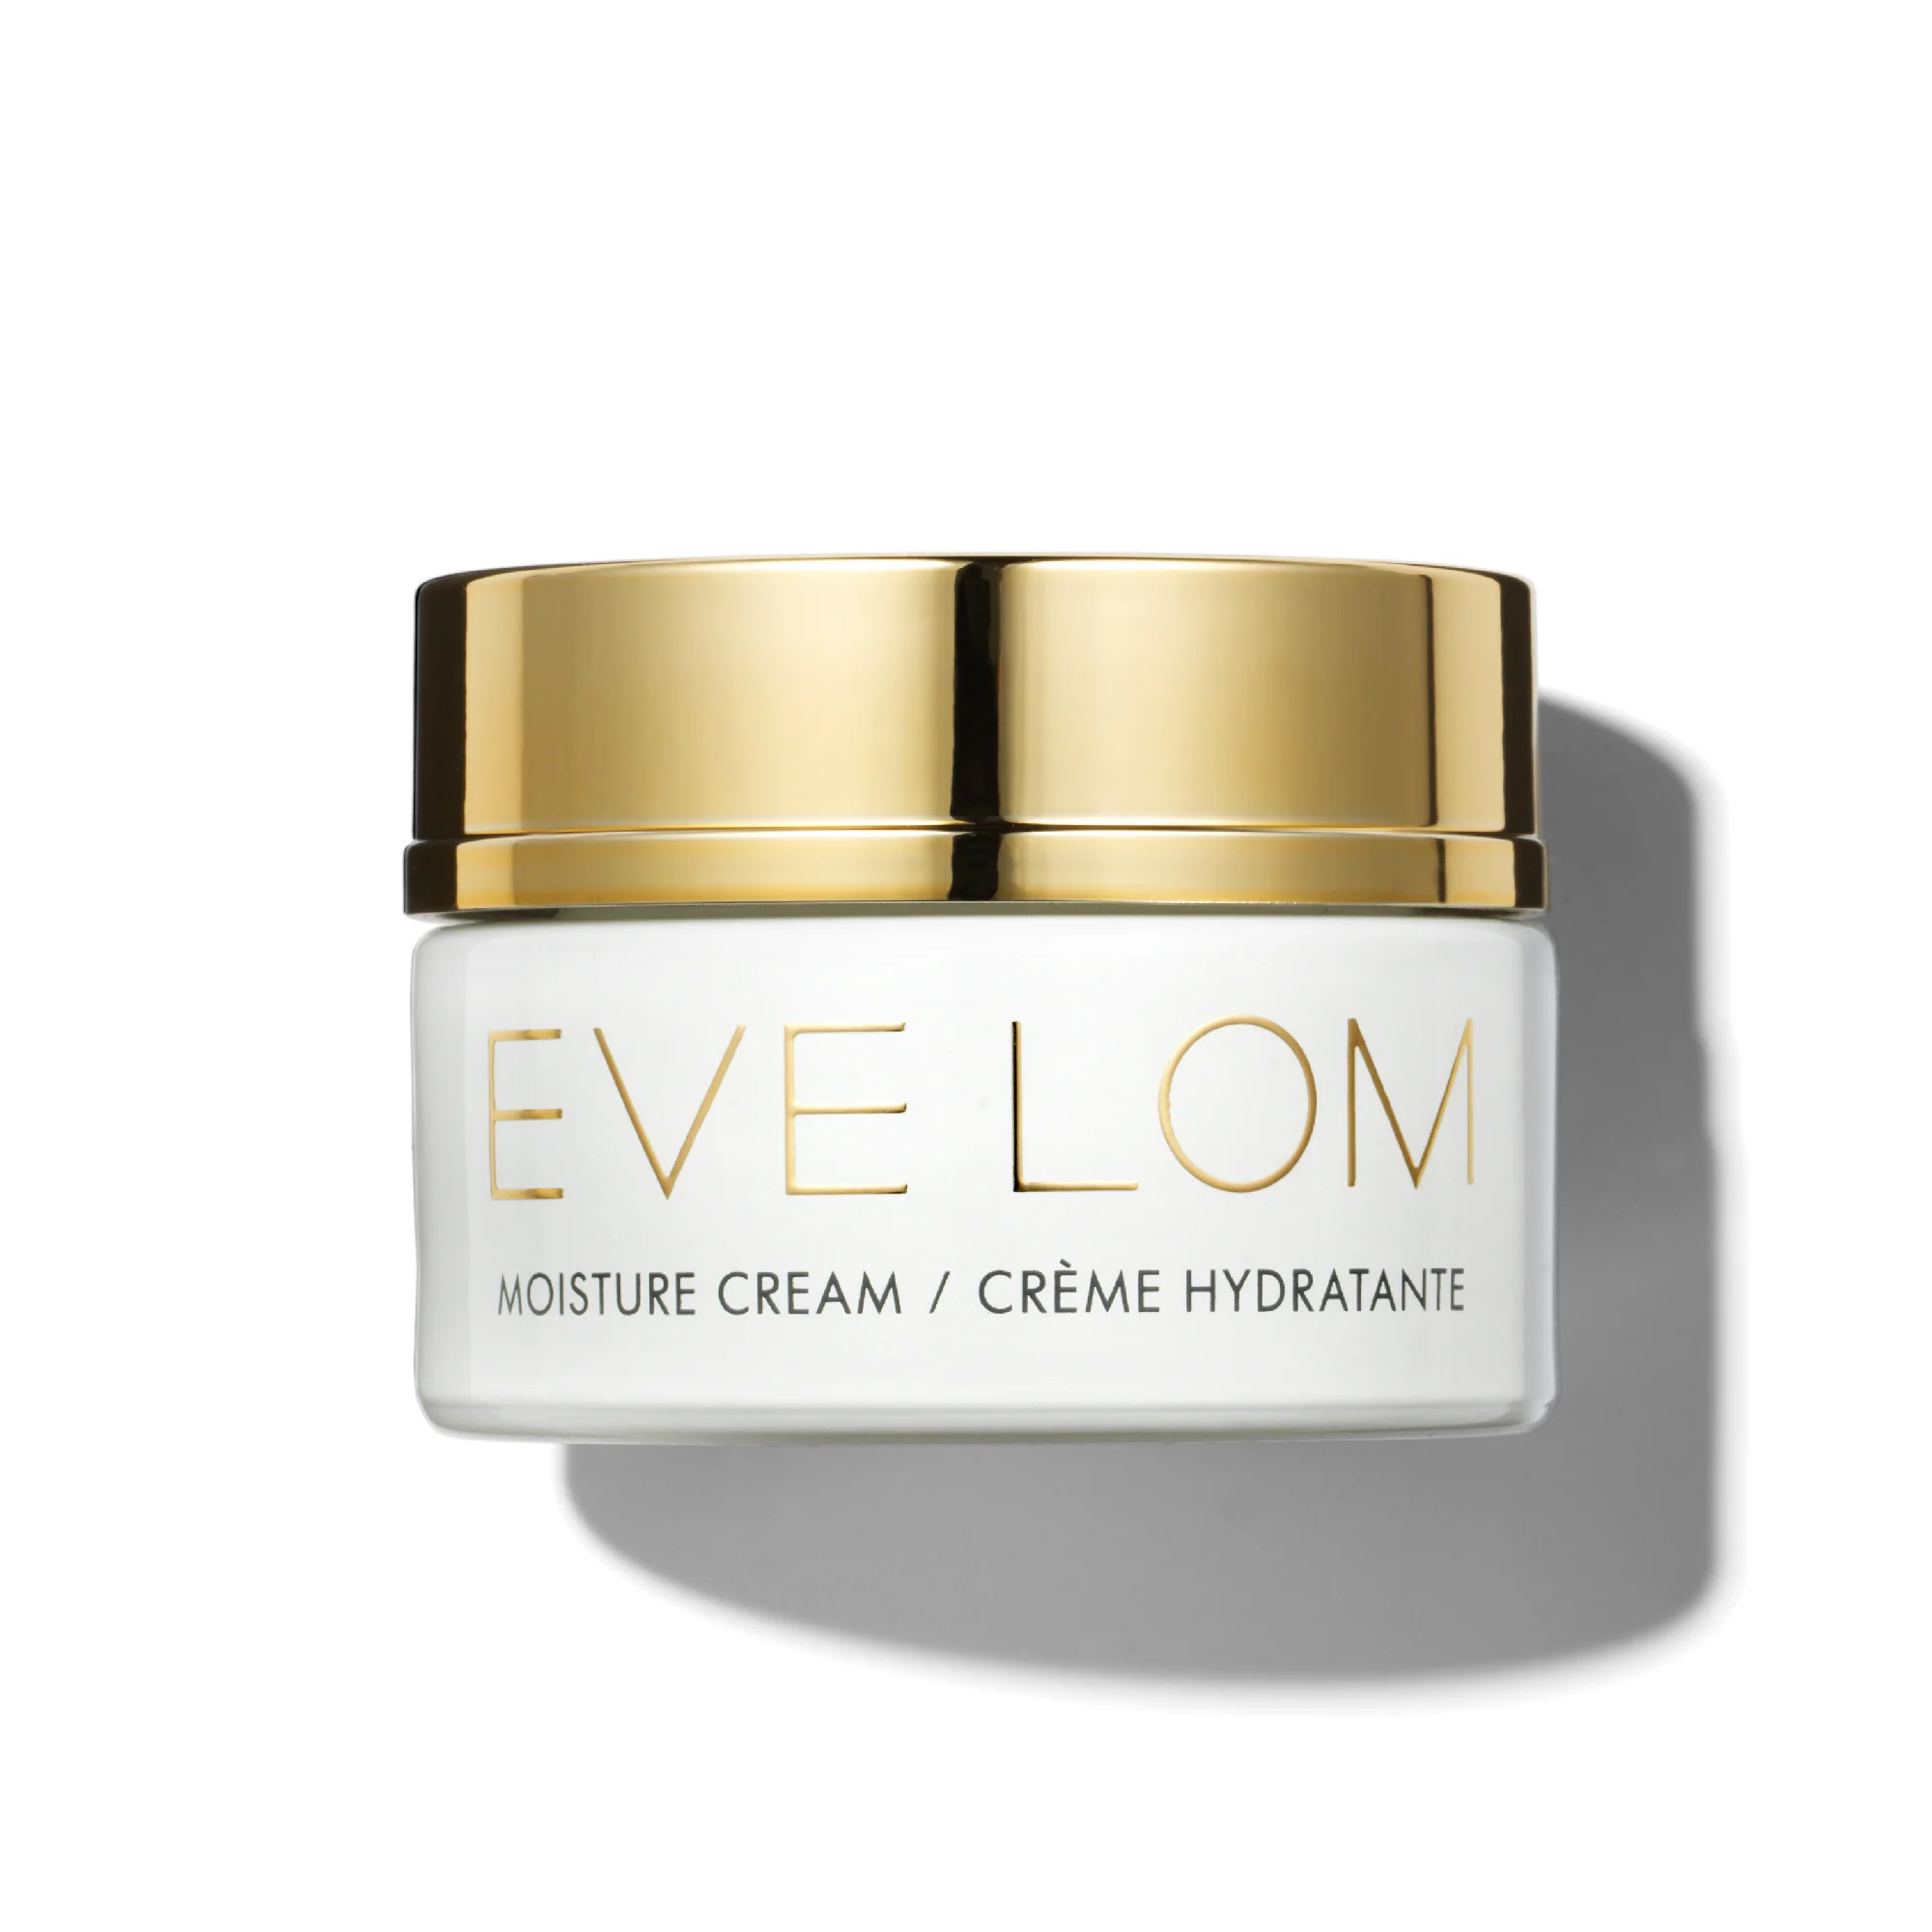 EVE LOM: A Skincare Brand Promoting Radiant and Healthy Skin